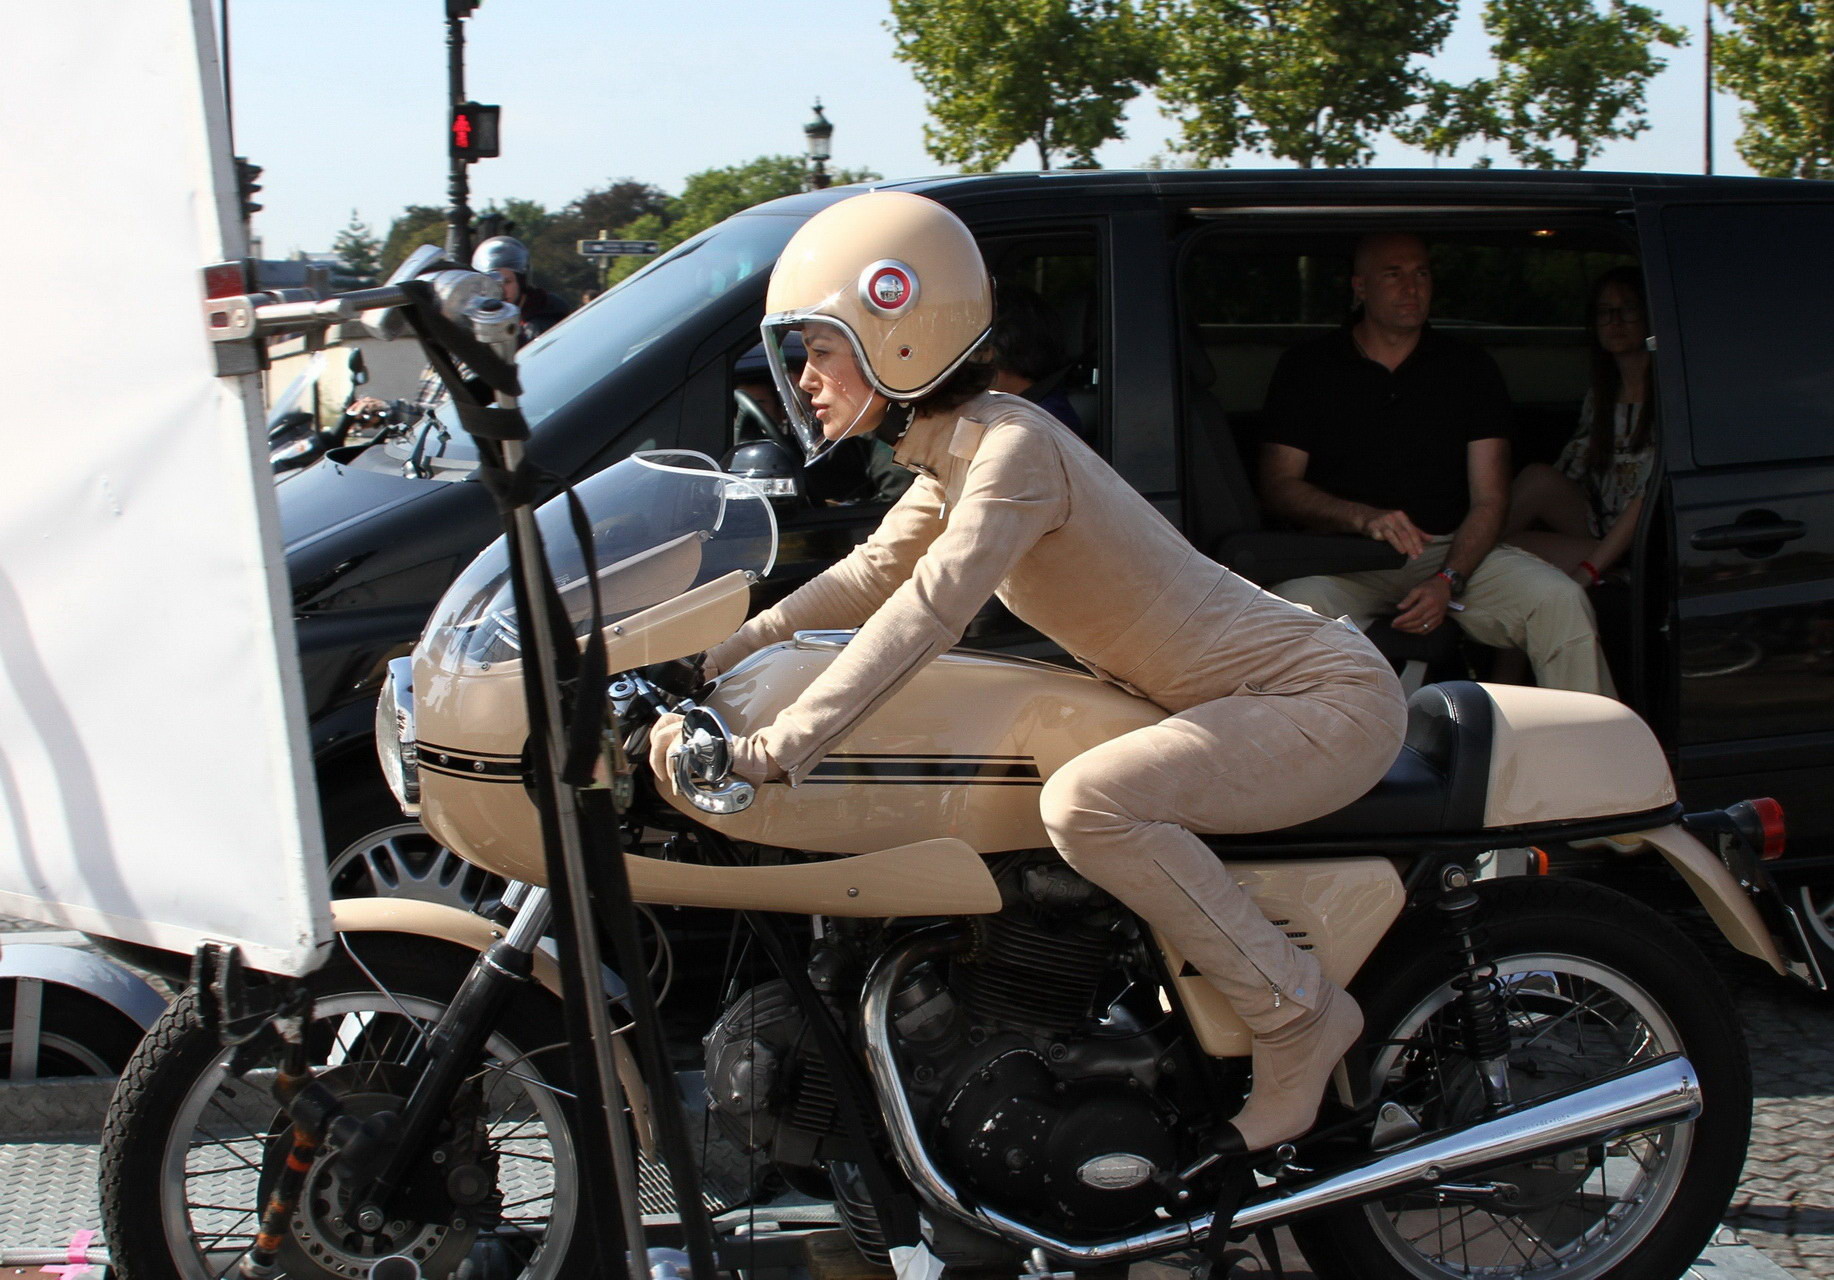 Keira Knightley in tight retro motorcycle suit shooting a commercial in Paris #75334747